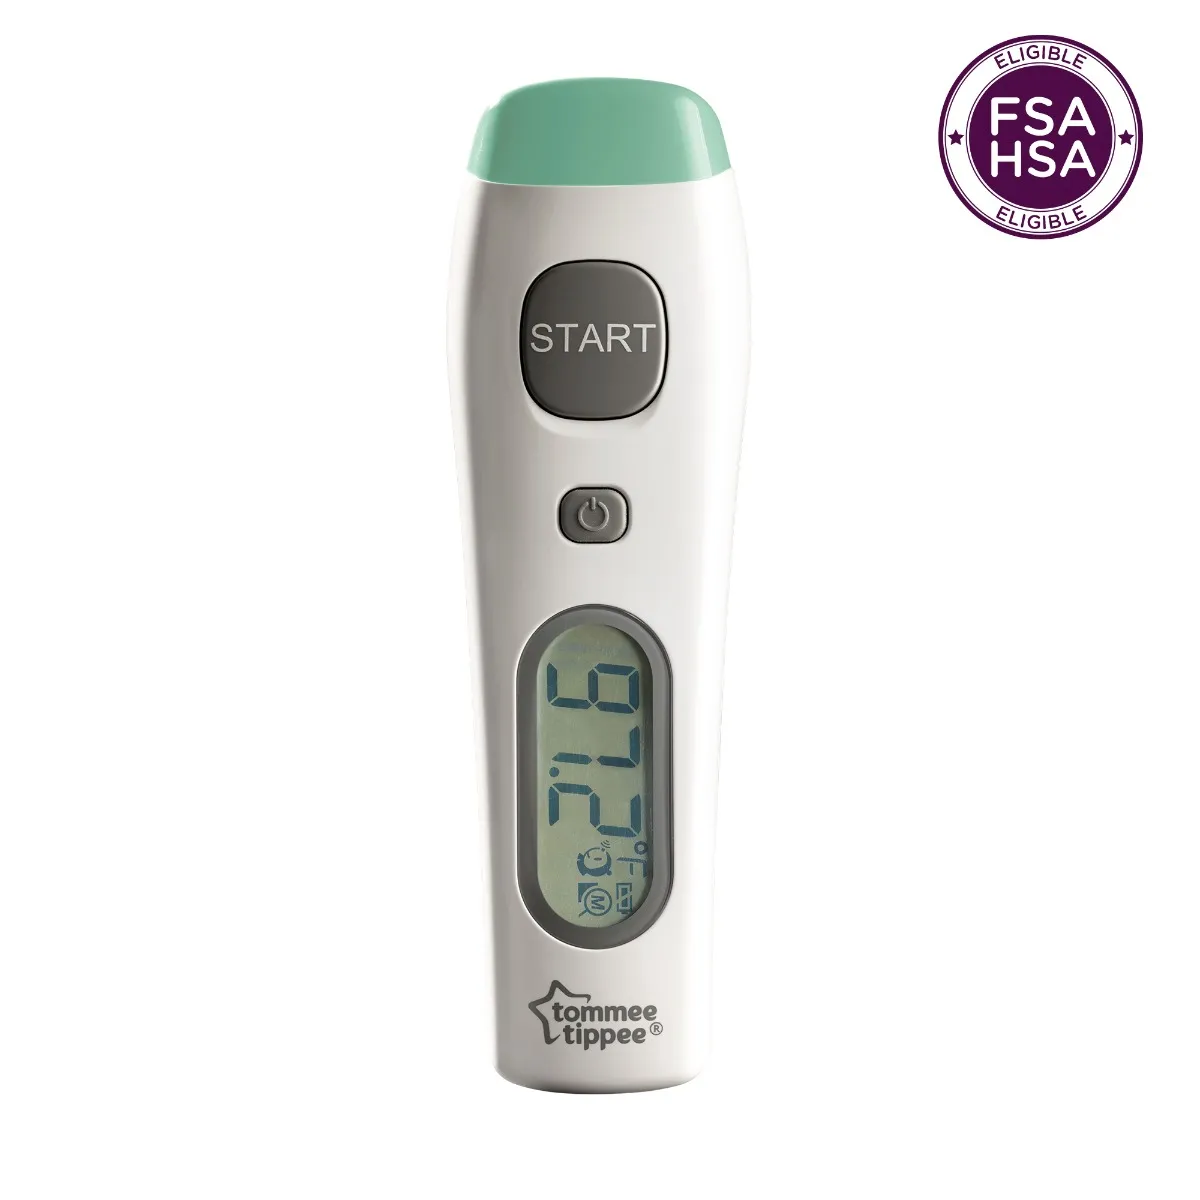 https://secure.tommeetippee.com/media/catalog/product/u/s/us_no_touch_thermometer_product_only_front_on.jpg